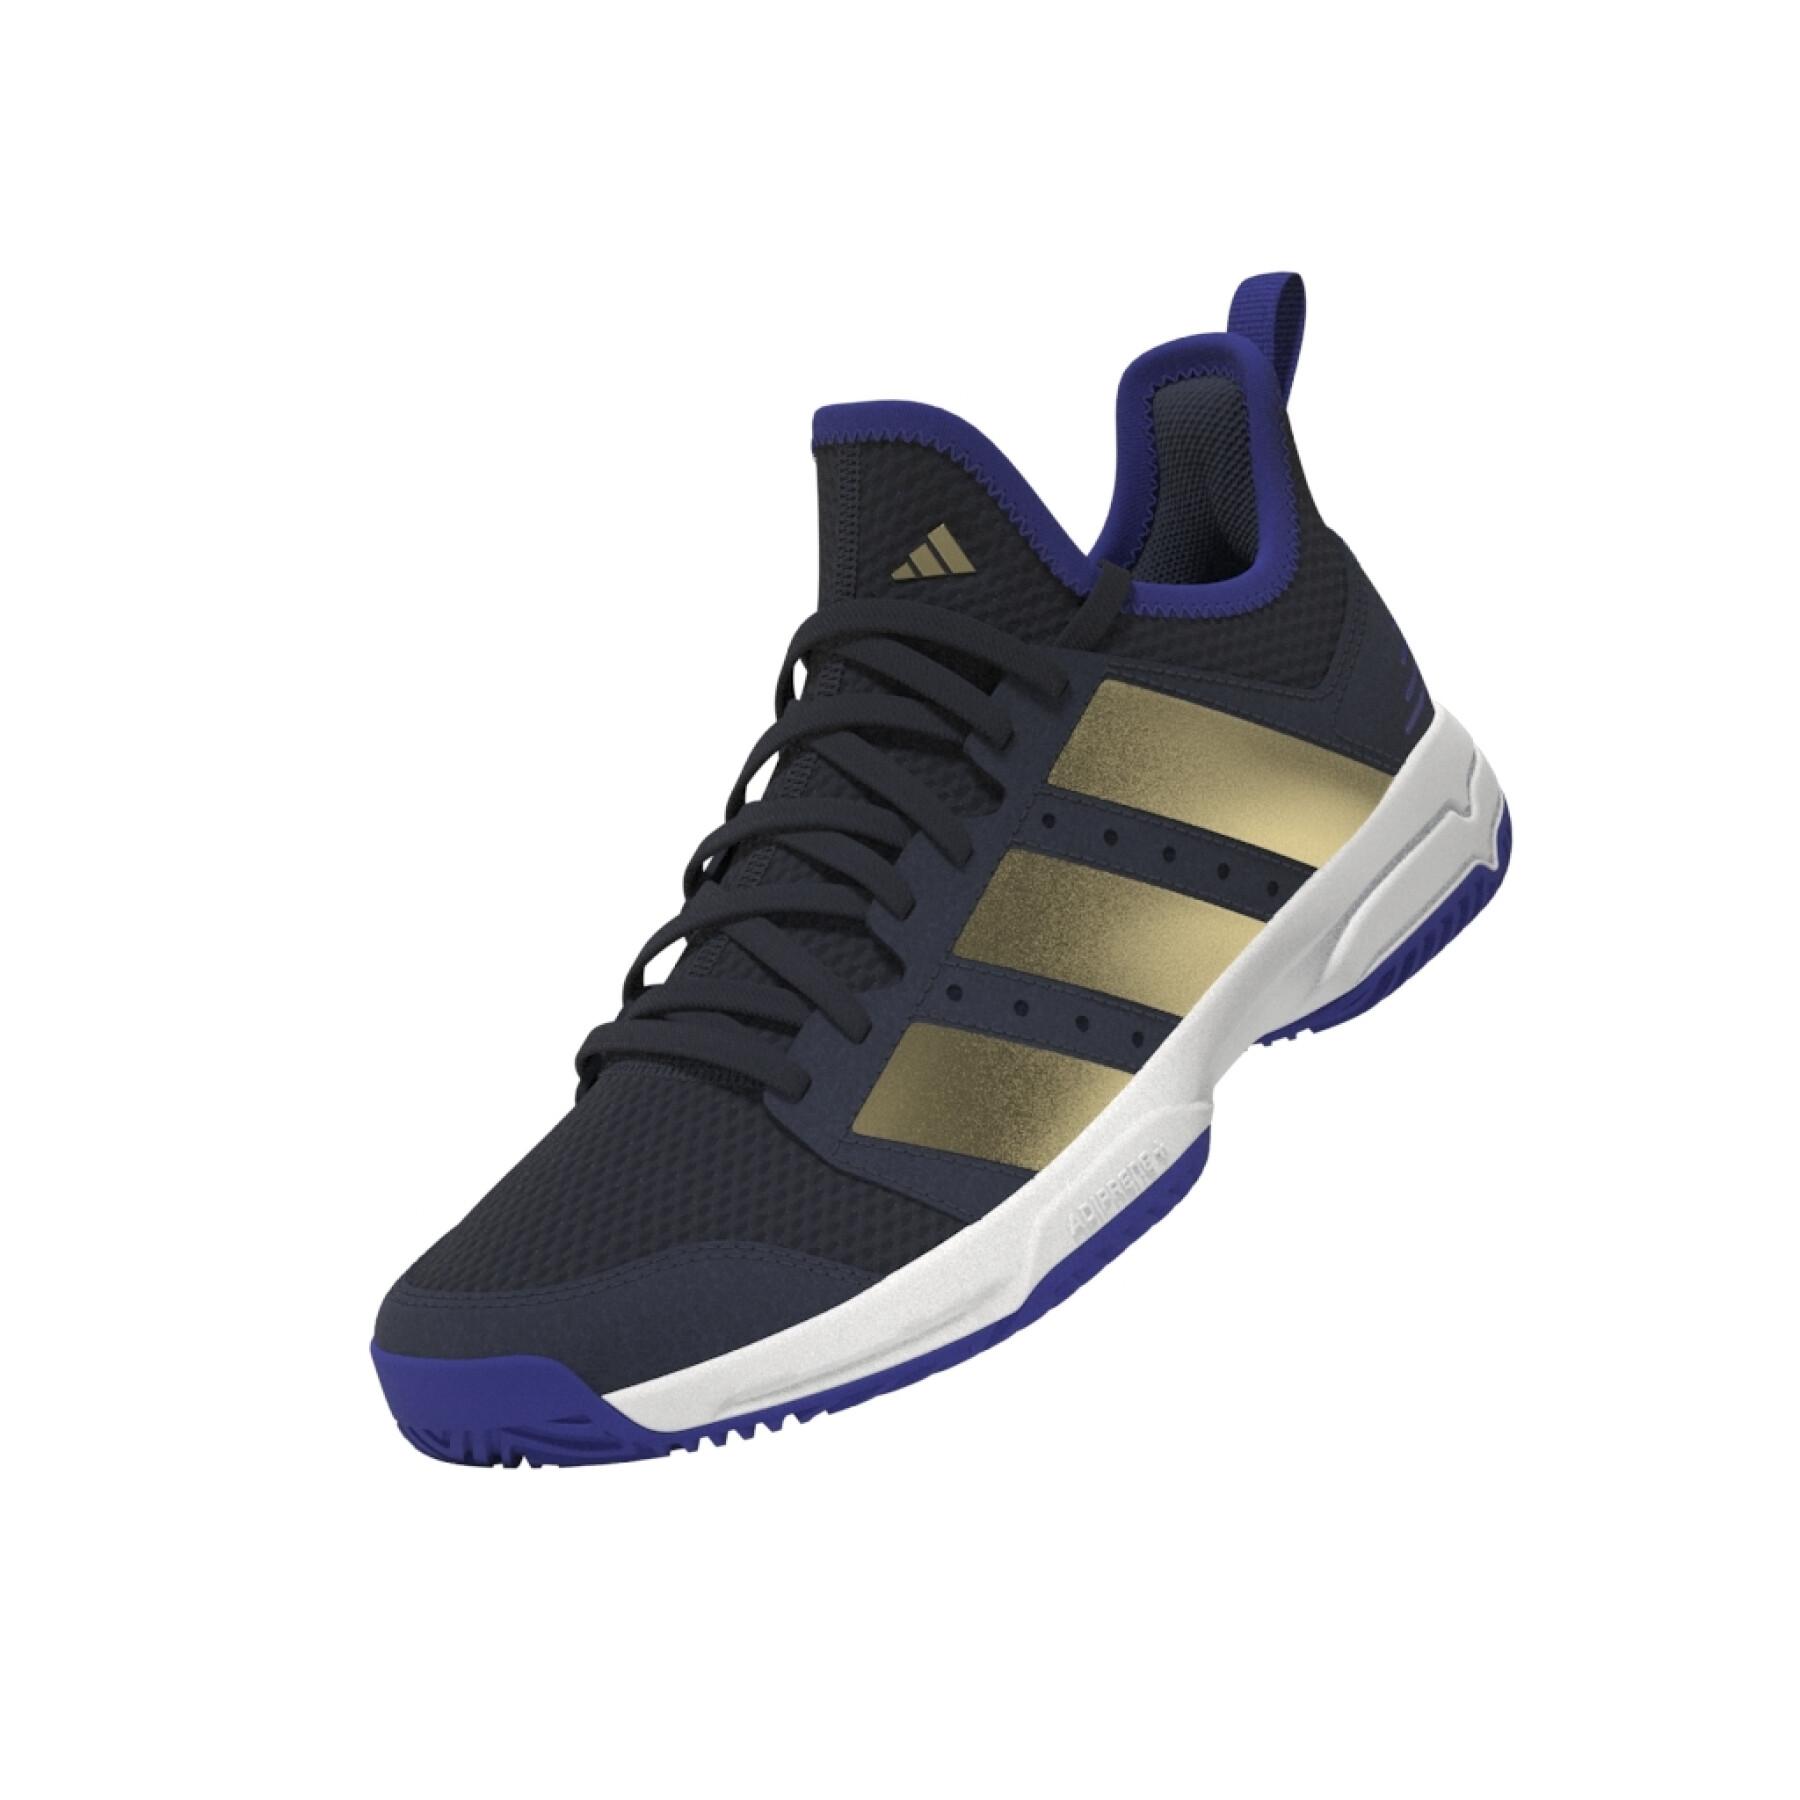 https://media.direct-volley.es/catalog/product/cache/image/1800x/9df78eab33525d08d6e5fb8d27136e95/a/d/adidas_hq1935_11_footwear_zip_-_turntable_3d-2_white.jpg